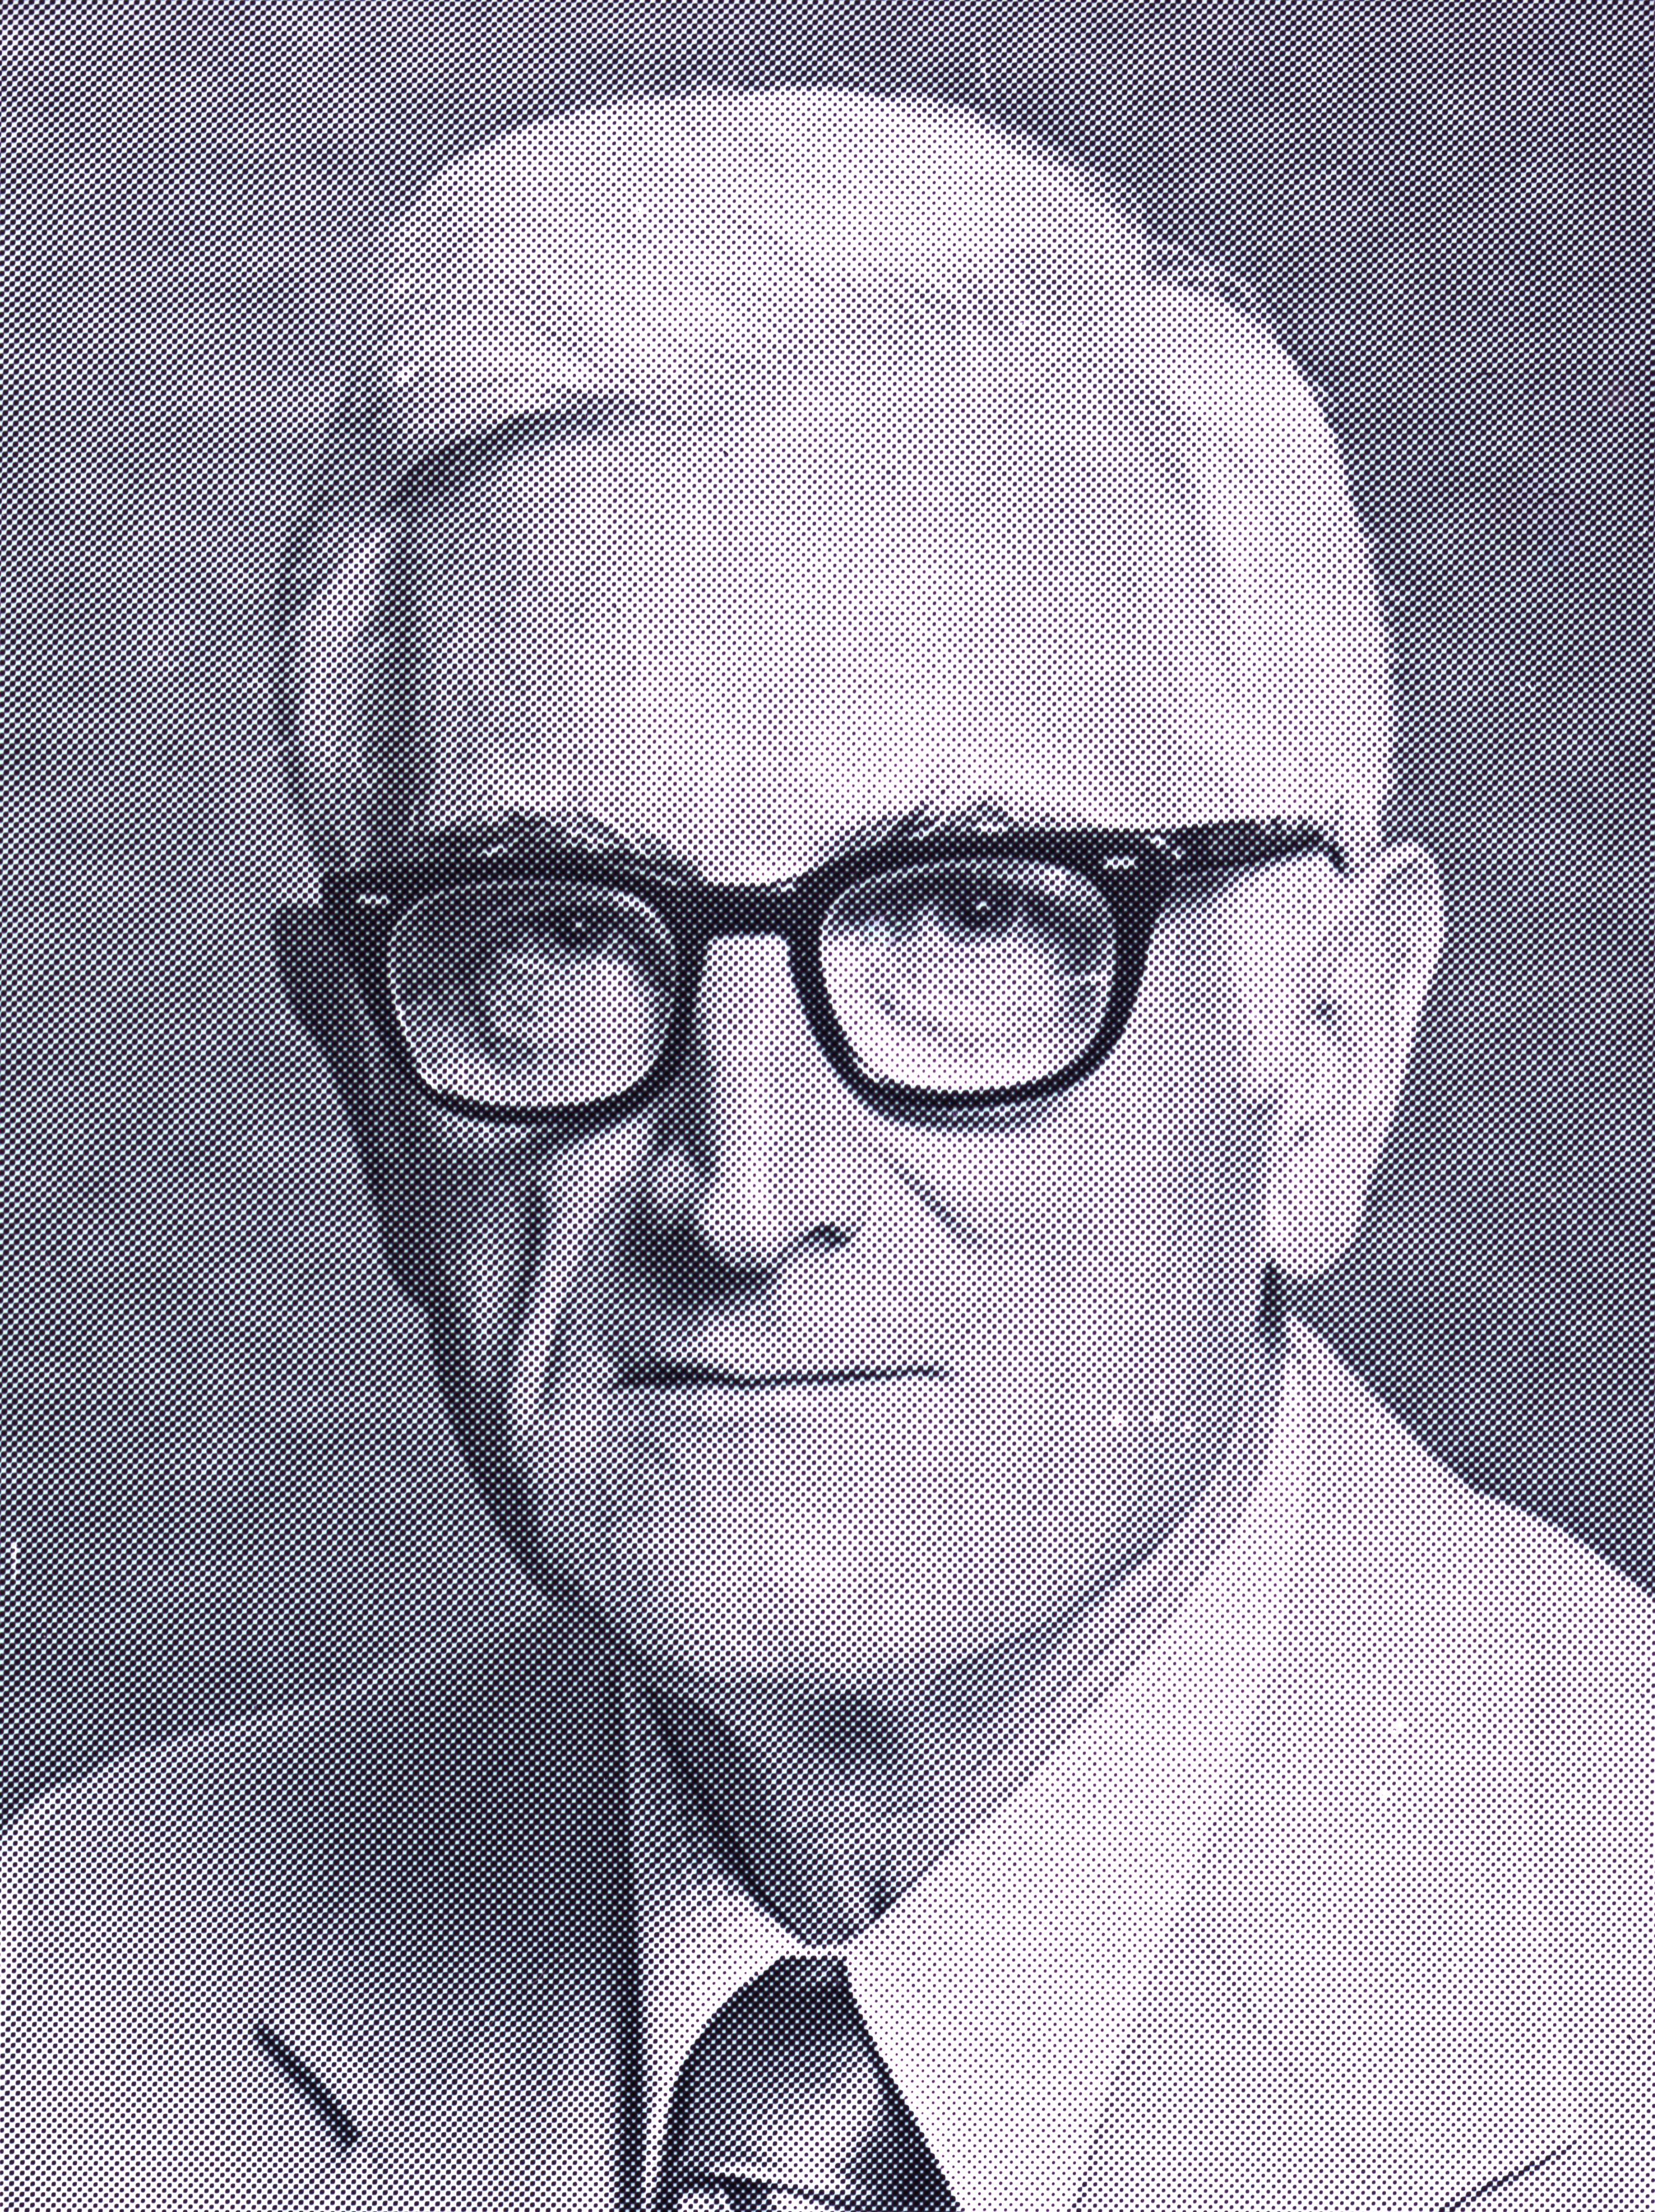 a black and white photo of a man with black glasses wearing a suit and tie